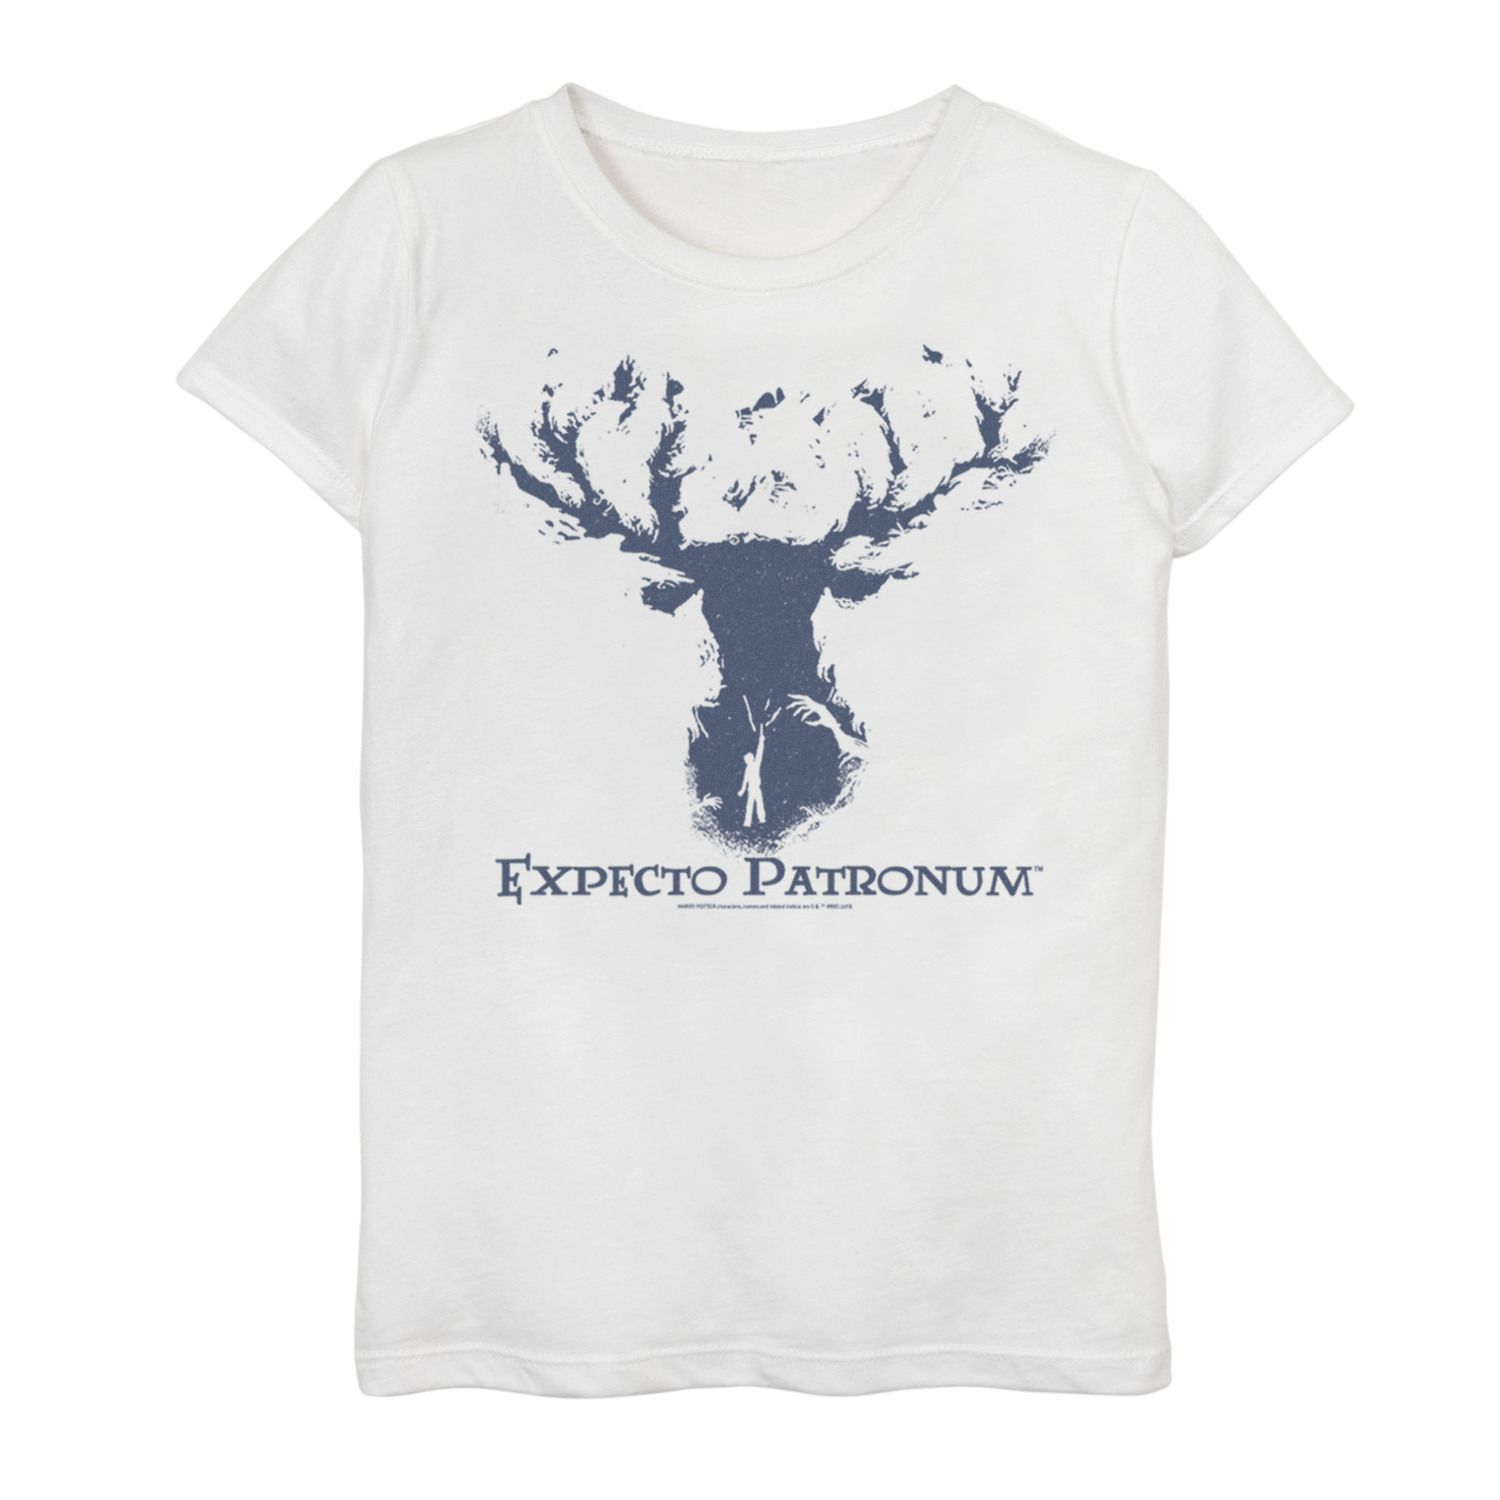 Image for Harry Potter Girls 7-16 Expecto Patronum Silhouette Graphic Tee at Kohl's.